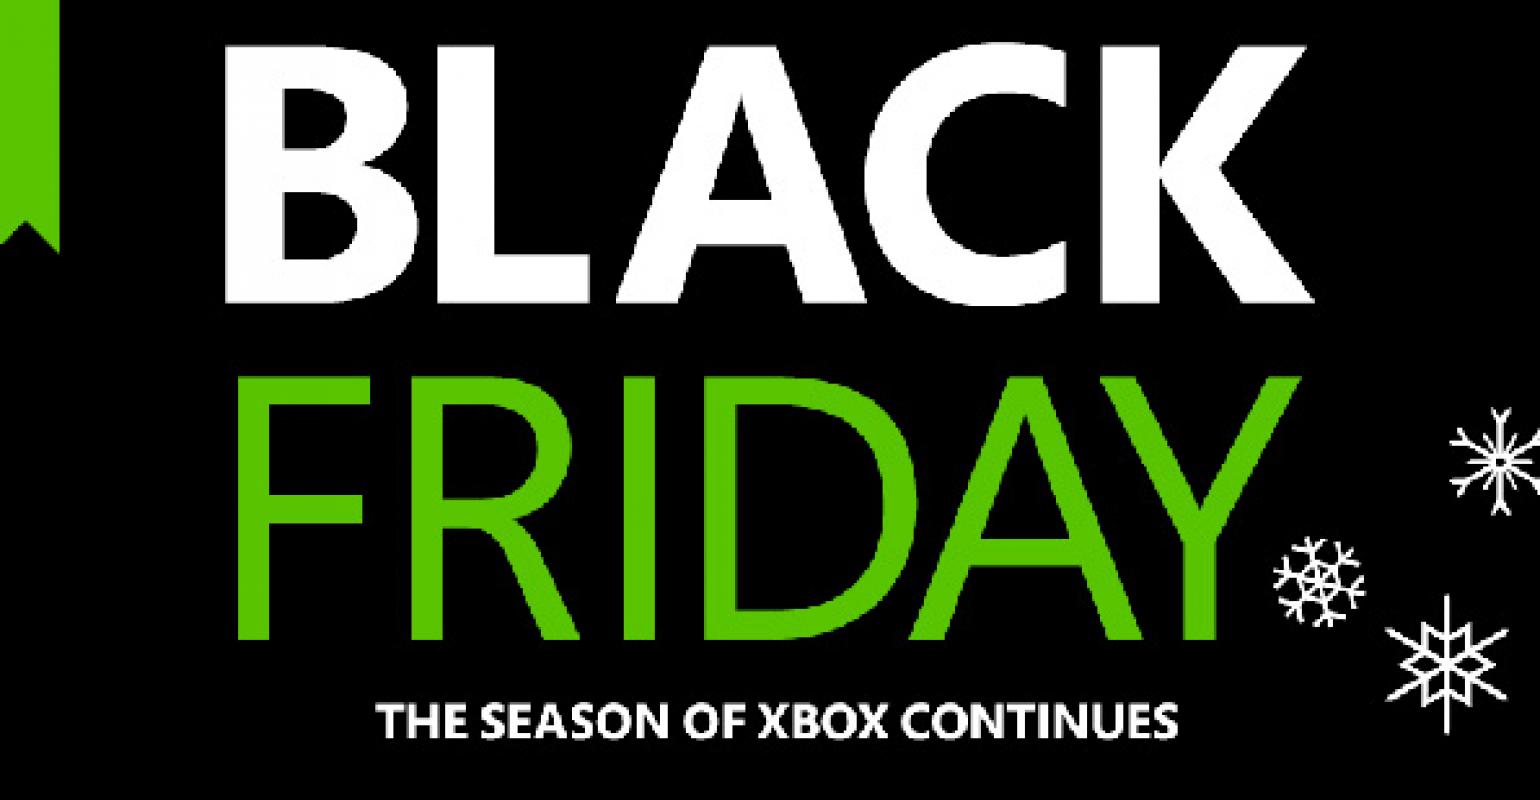 Xbox One to Start at Just $329 on Black Friday Weekend  ITPro Today: IT  News, How-Tos, Trends, Case Studies, Career Tips, More